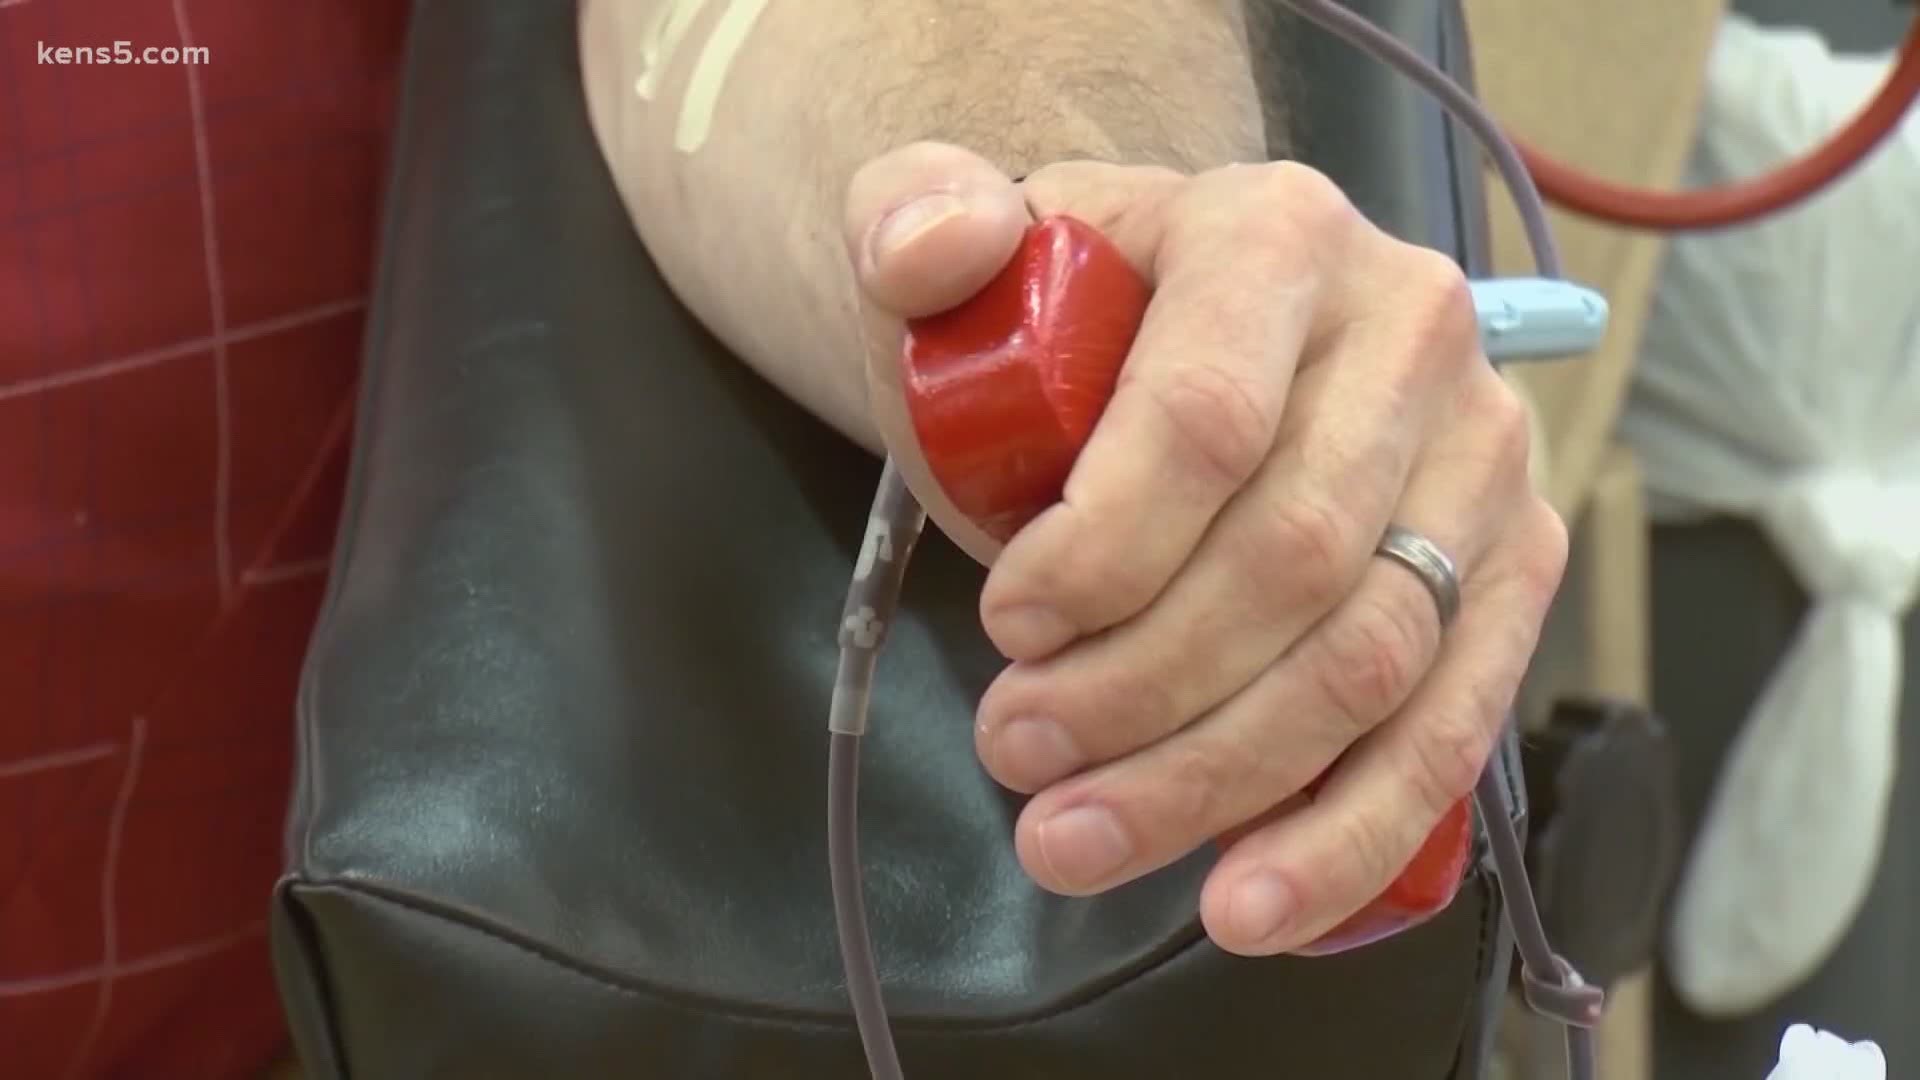 The South Texas Blood and Tissue Center is lifting some rules hoping to bring in more donations.